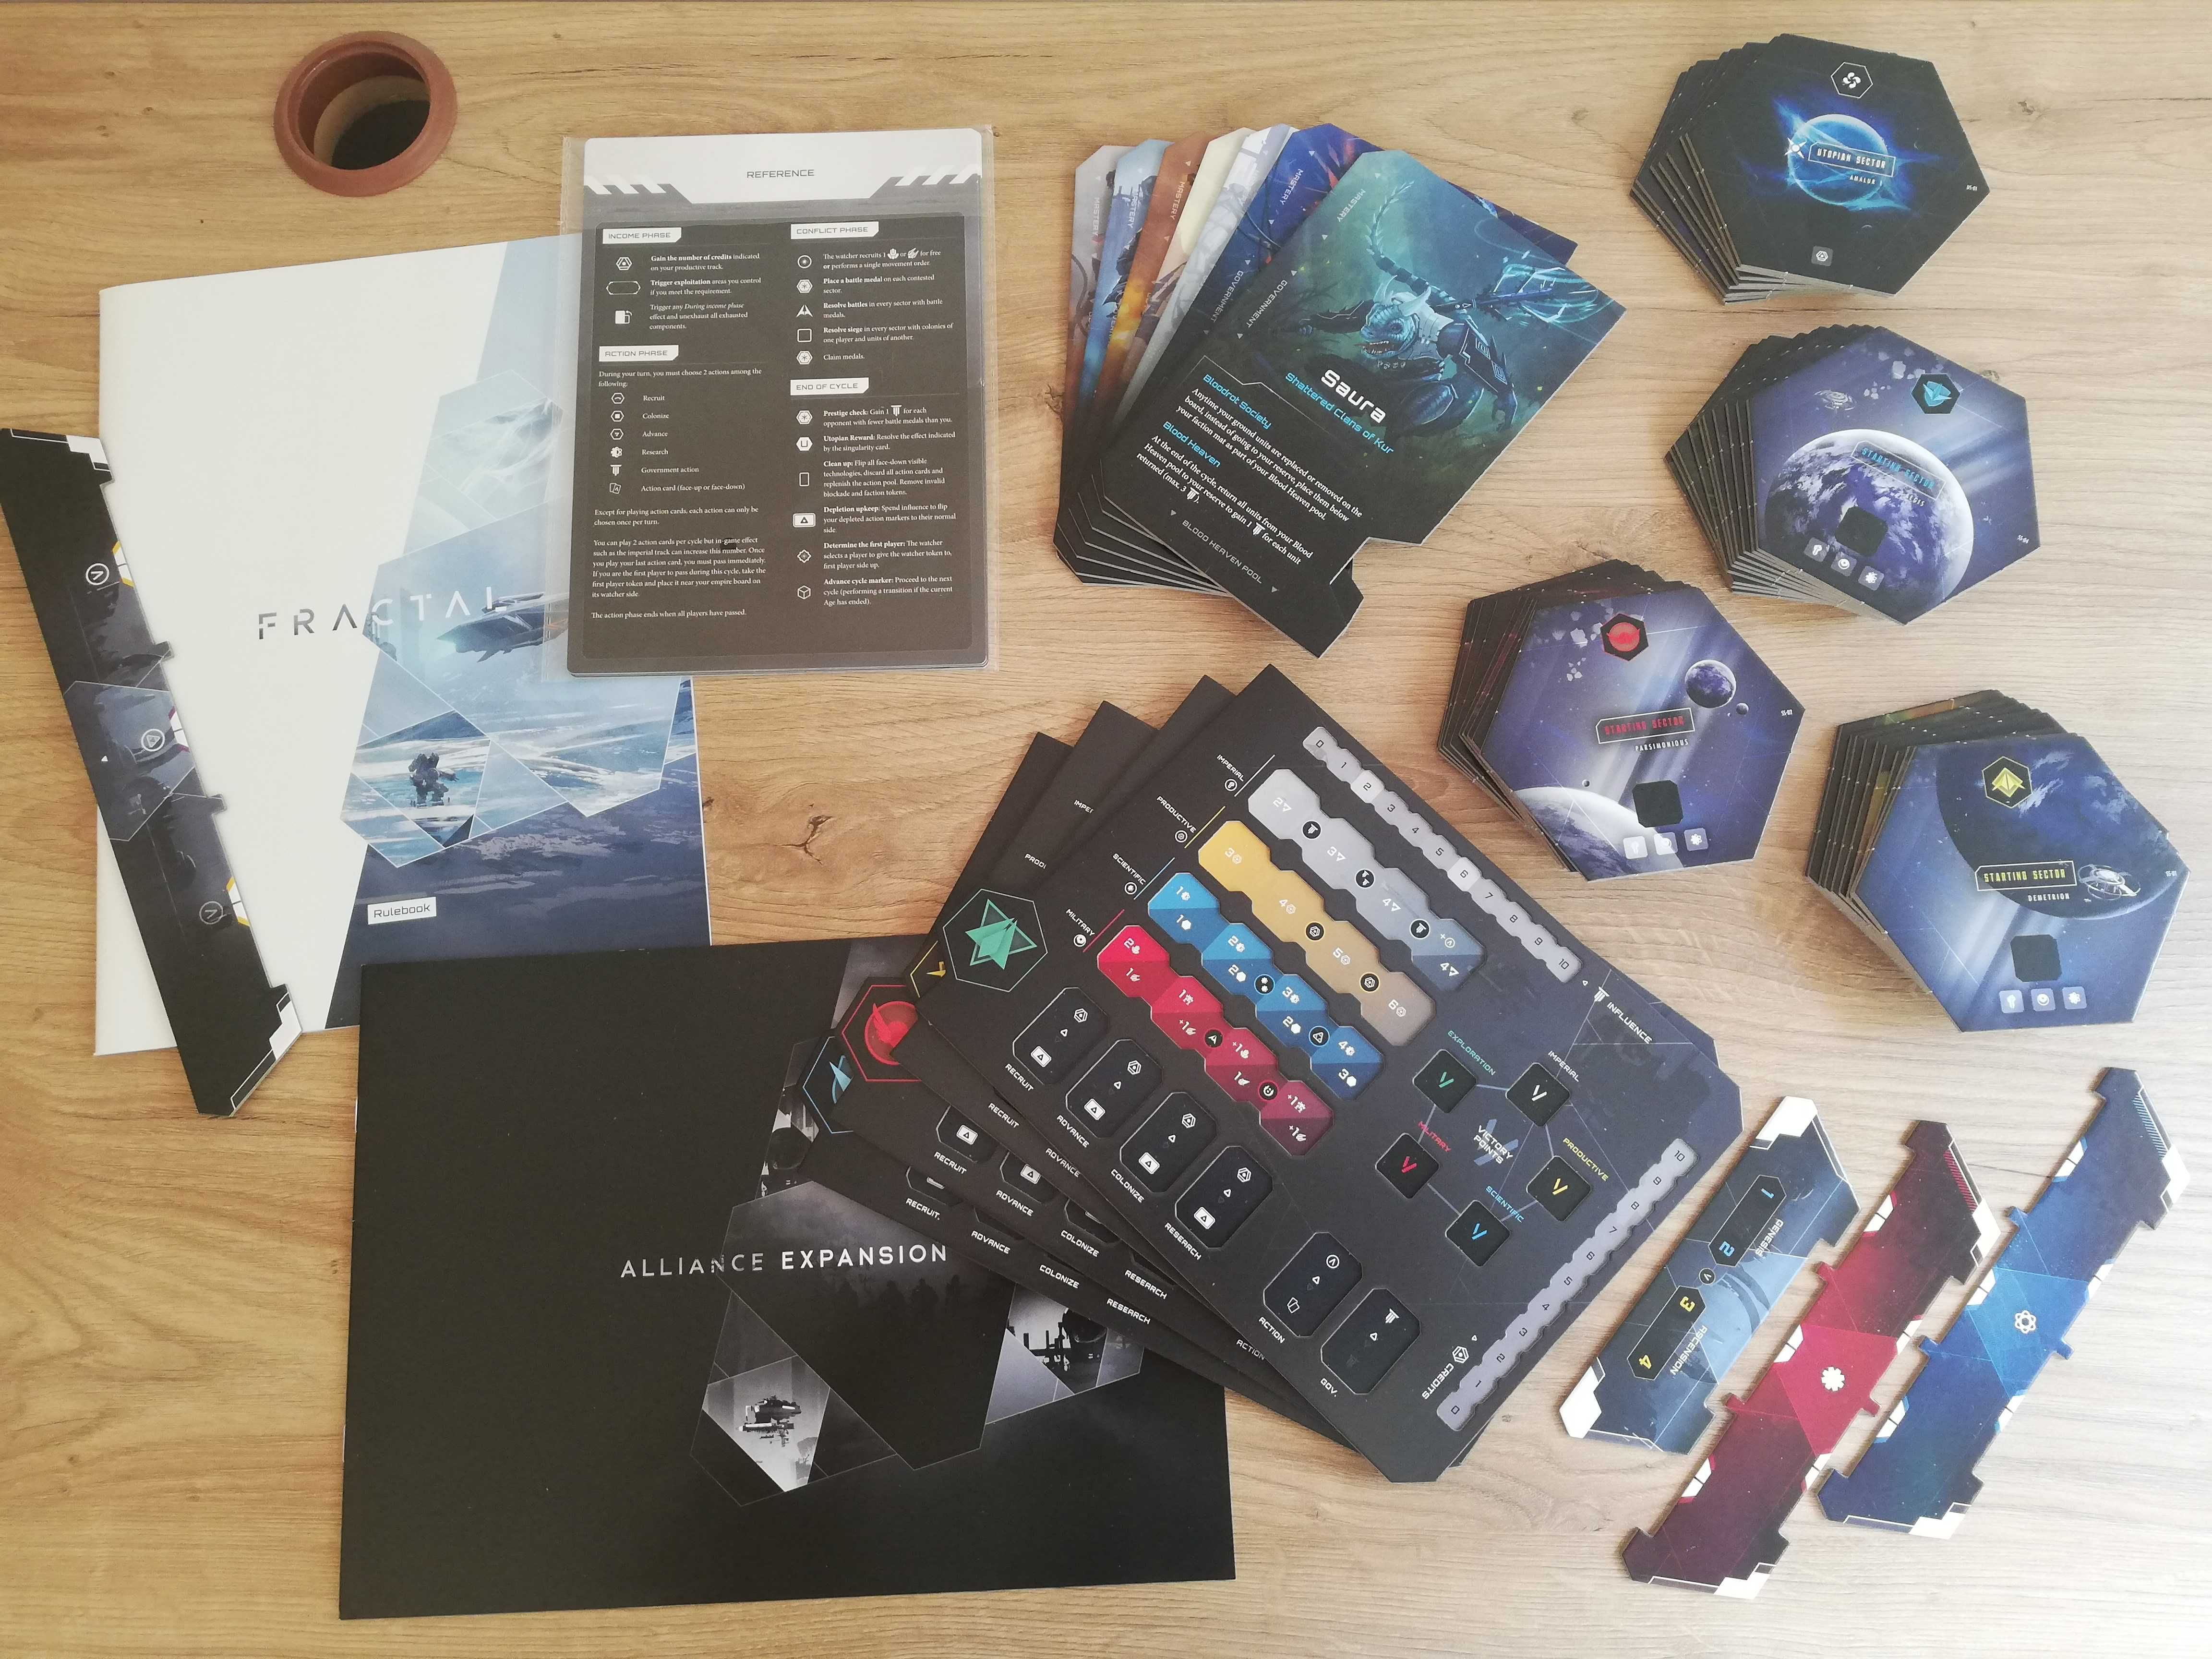 Fractal: Beyond the Void Collector Edition + Automata + Metal Coins KS